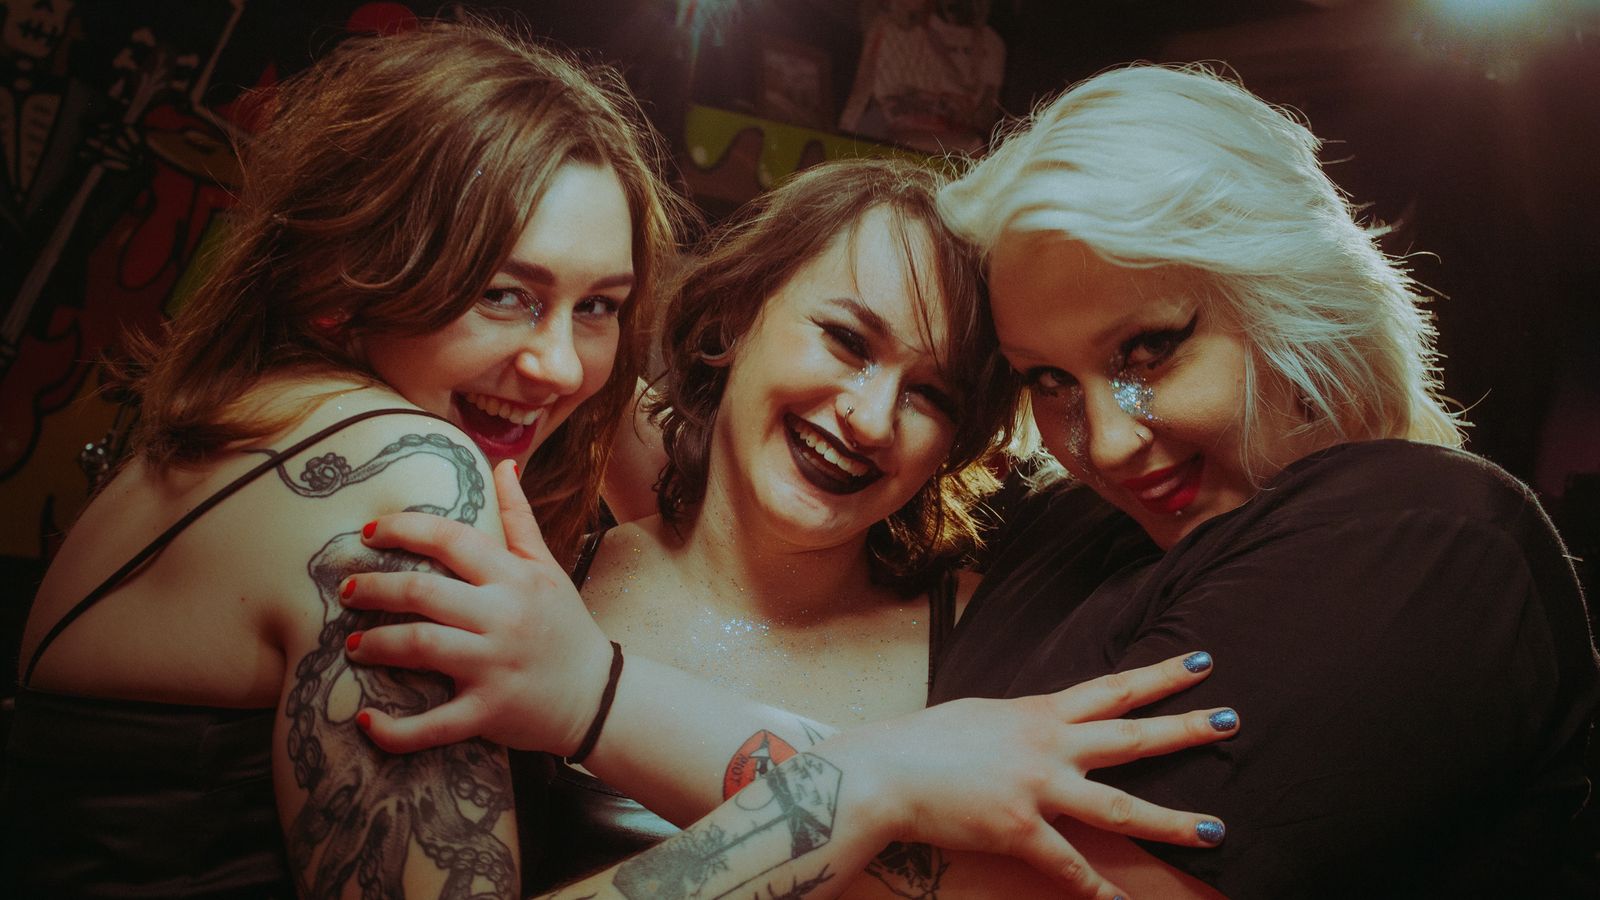 Death Pill: The Ukrainian female punk trio separated by Russia's war - 'I don't choose to live in a horror film'